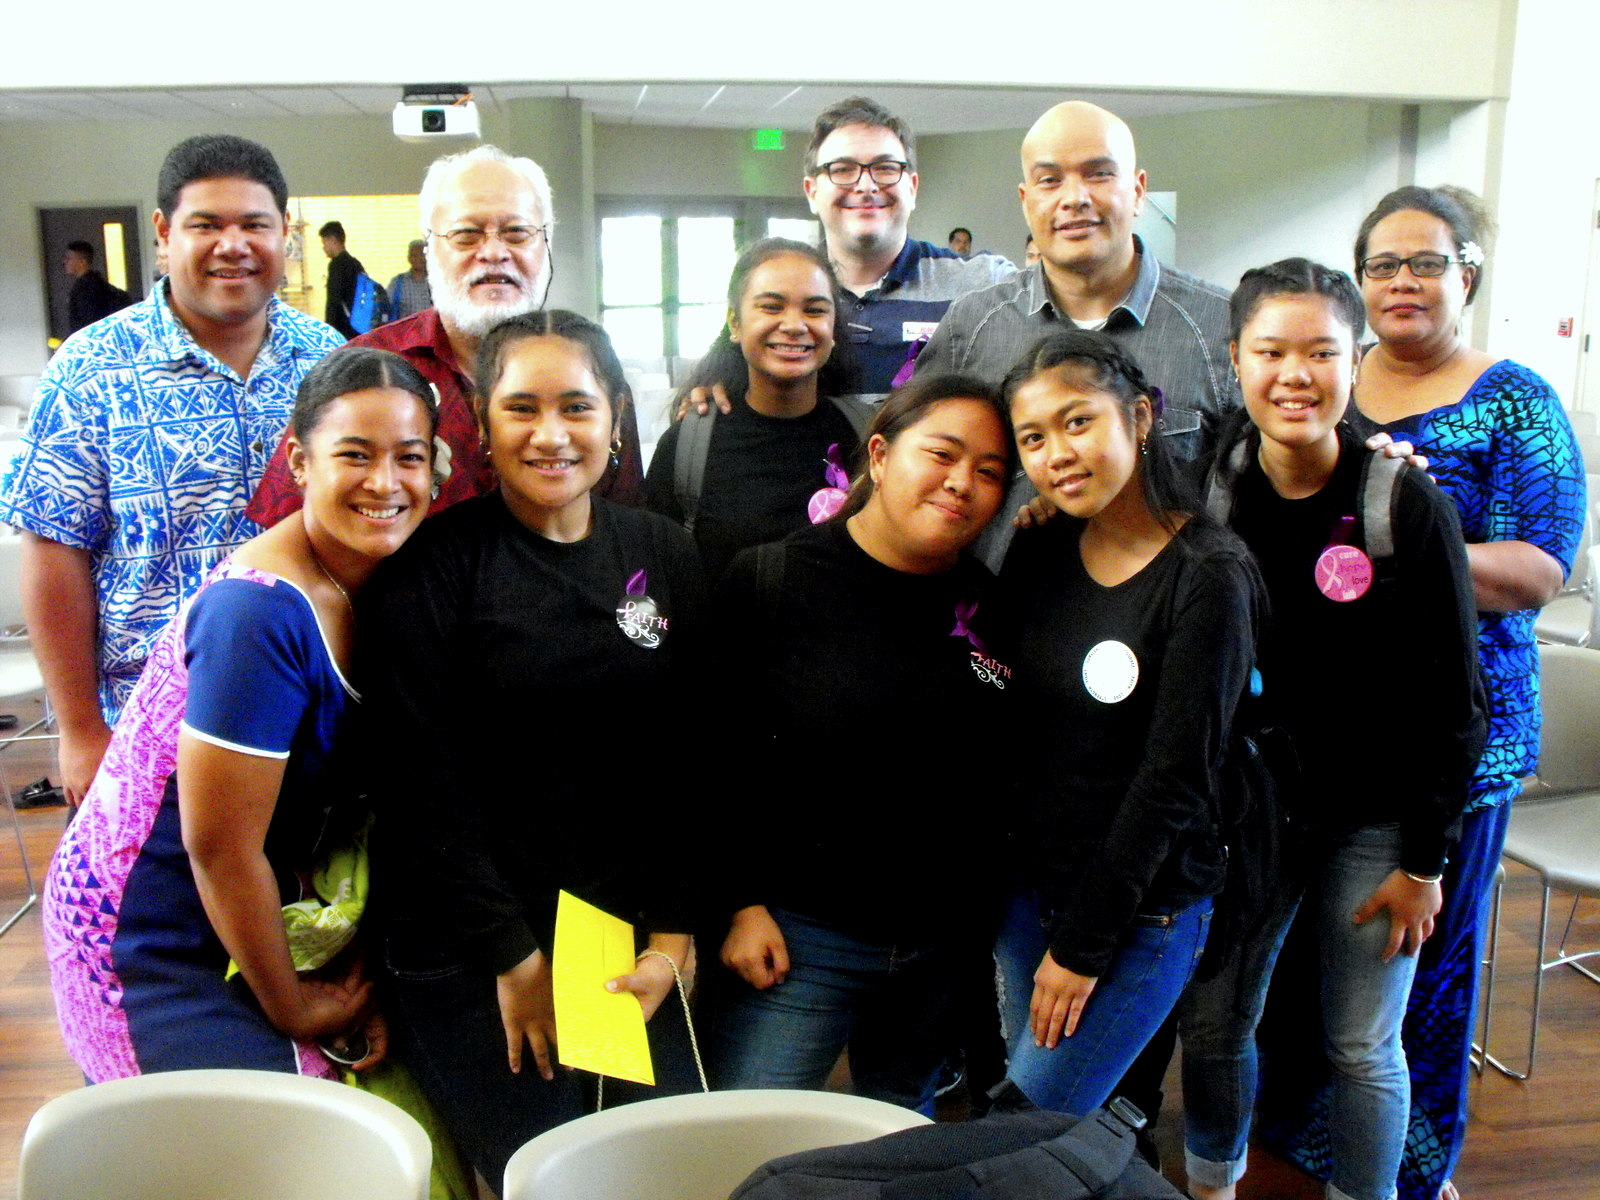 members of the judges panel congratulate the Samoana High School students (front, in black t-shirts) who took first place in the “Liuliu le Tofa” Poetry Slam